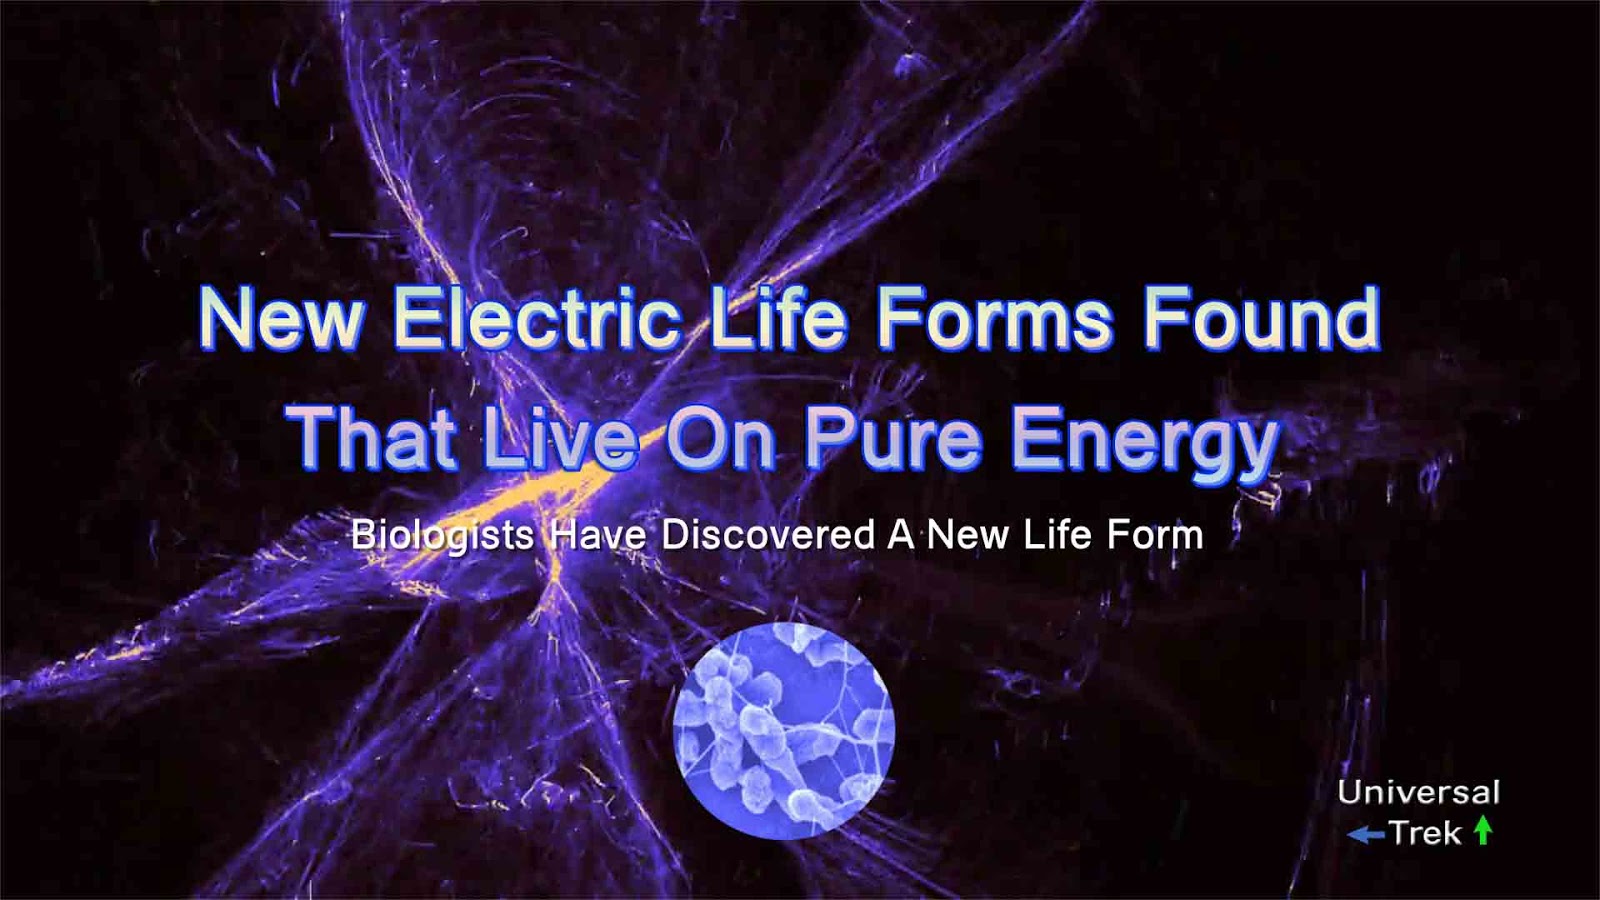 Electricity is life. Life Electric. Energy Lifeforms. Energetic Life form. Agitation Lifeforms.